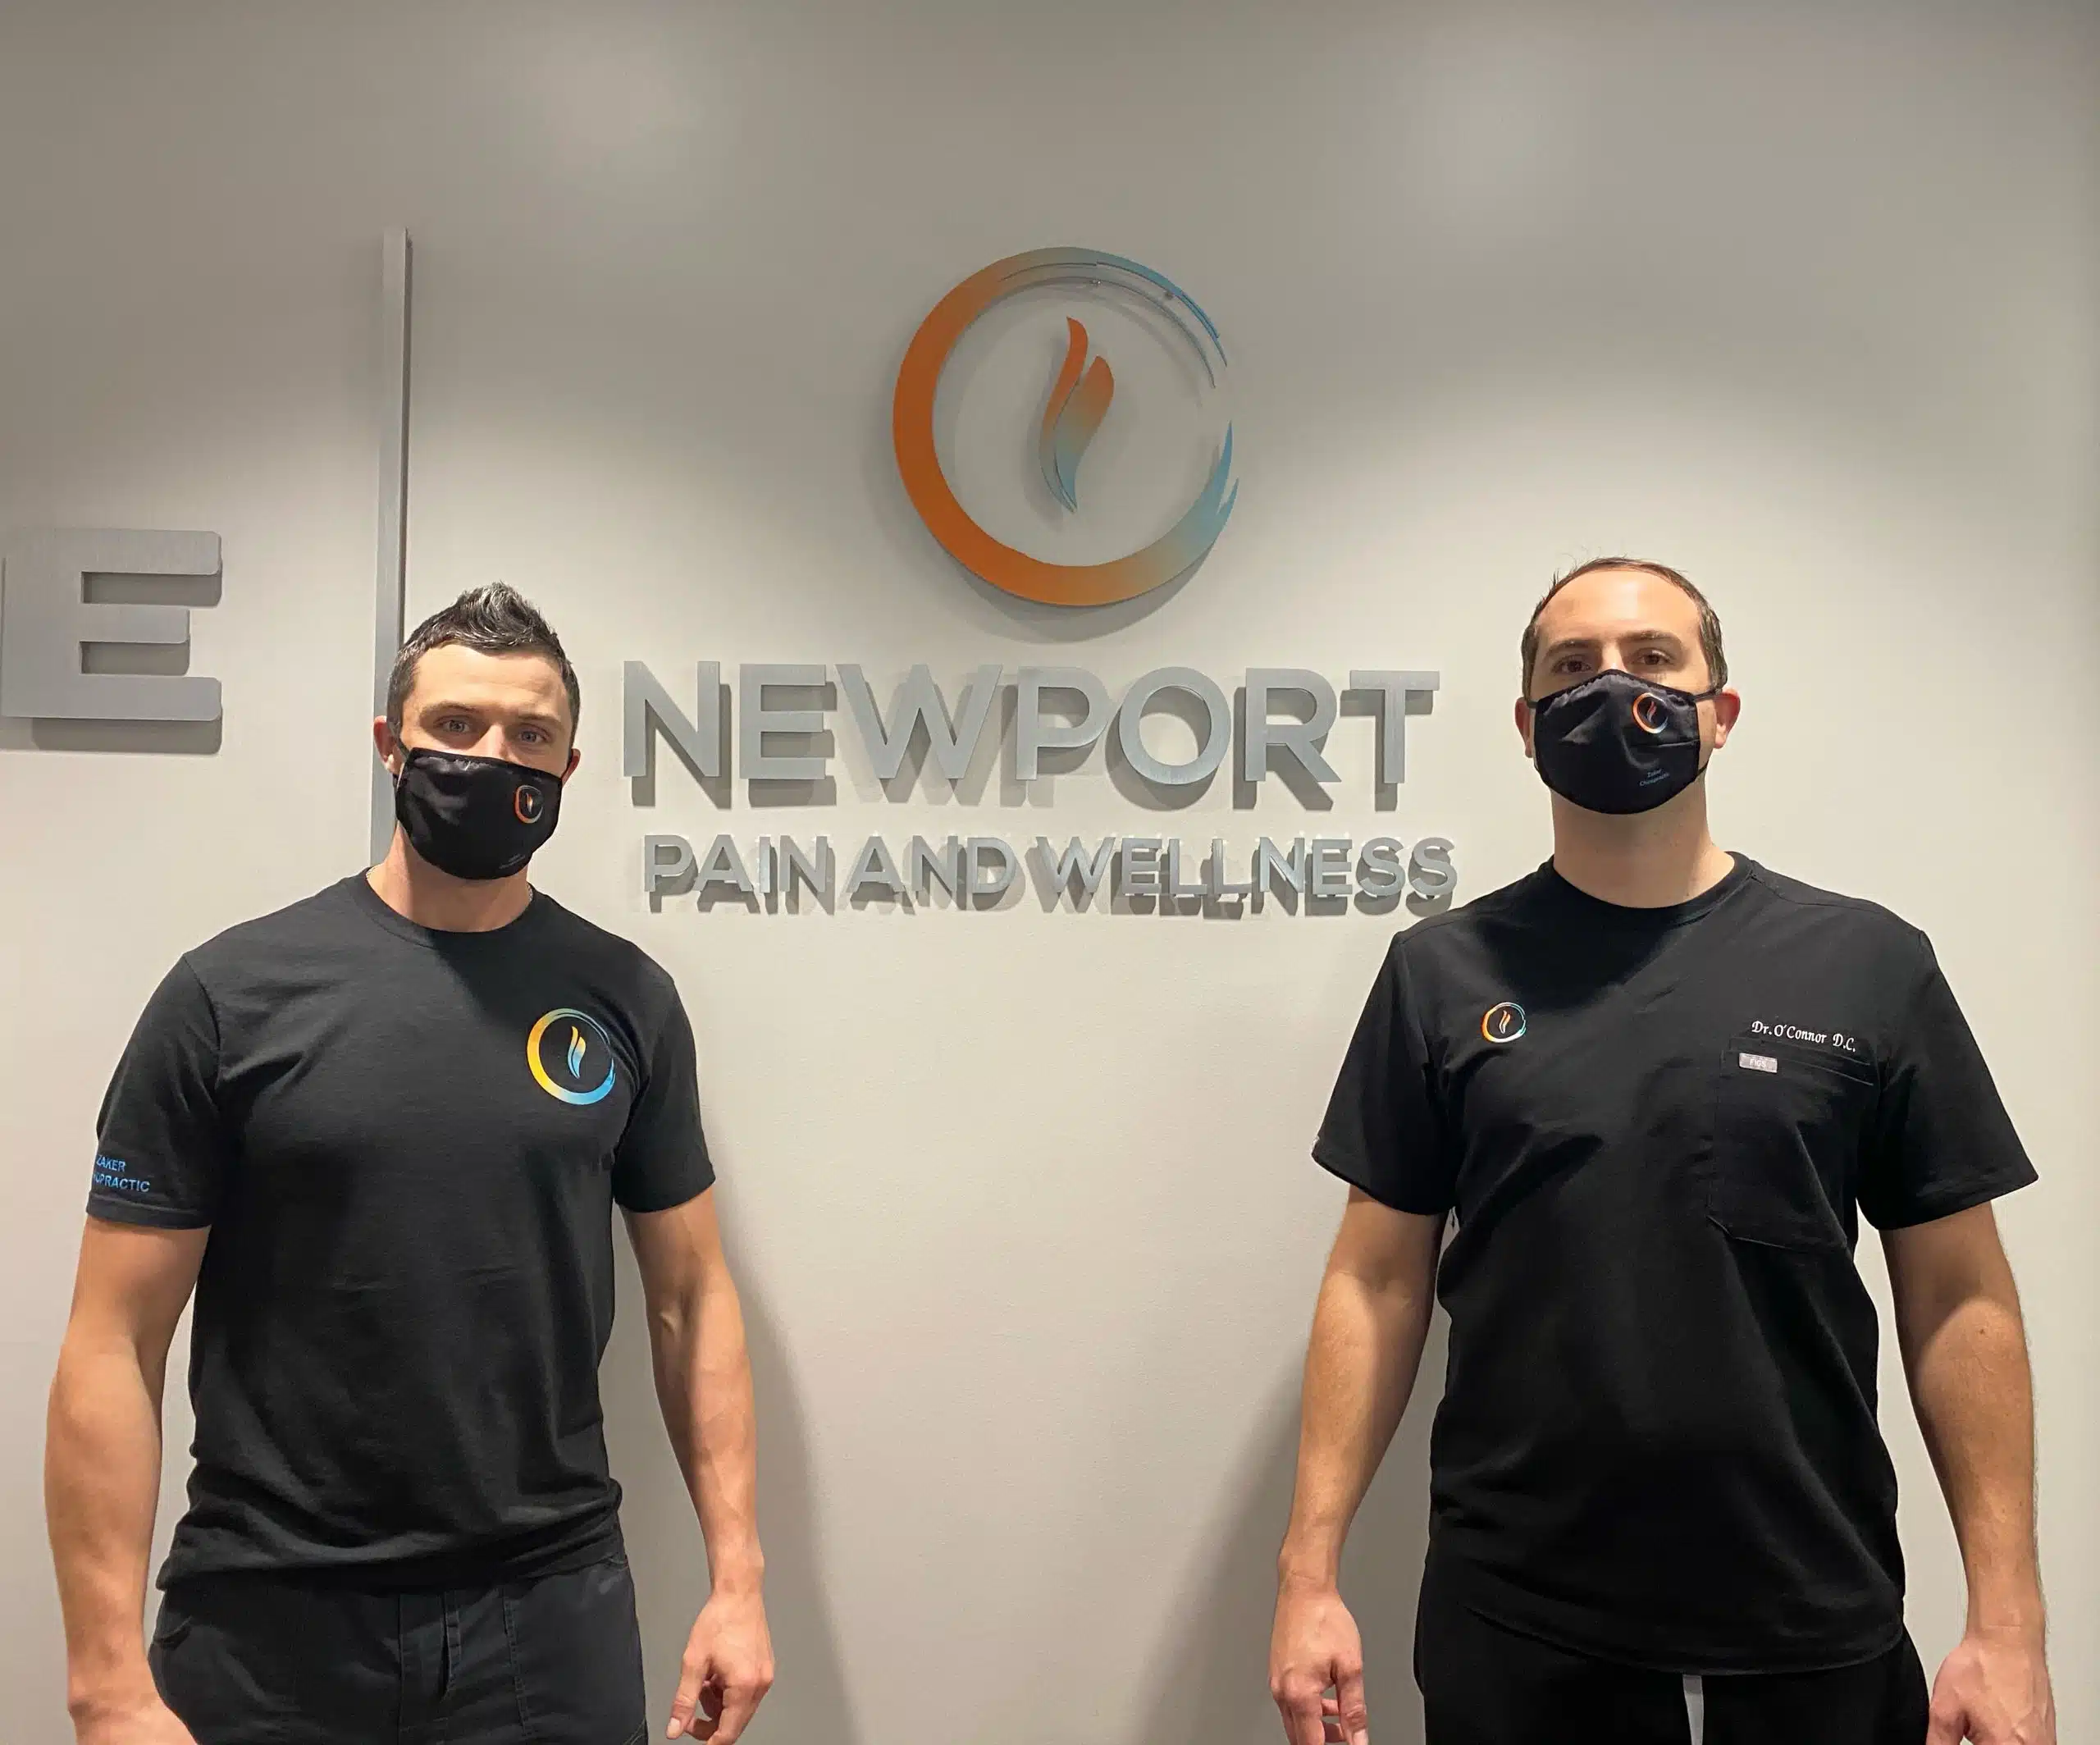 professional team at newport pain and wellness